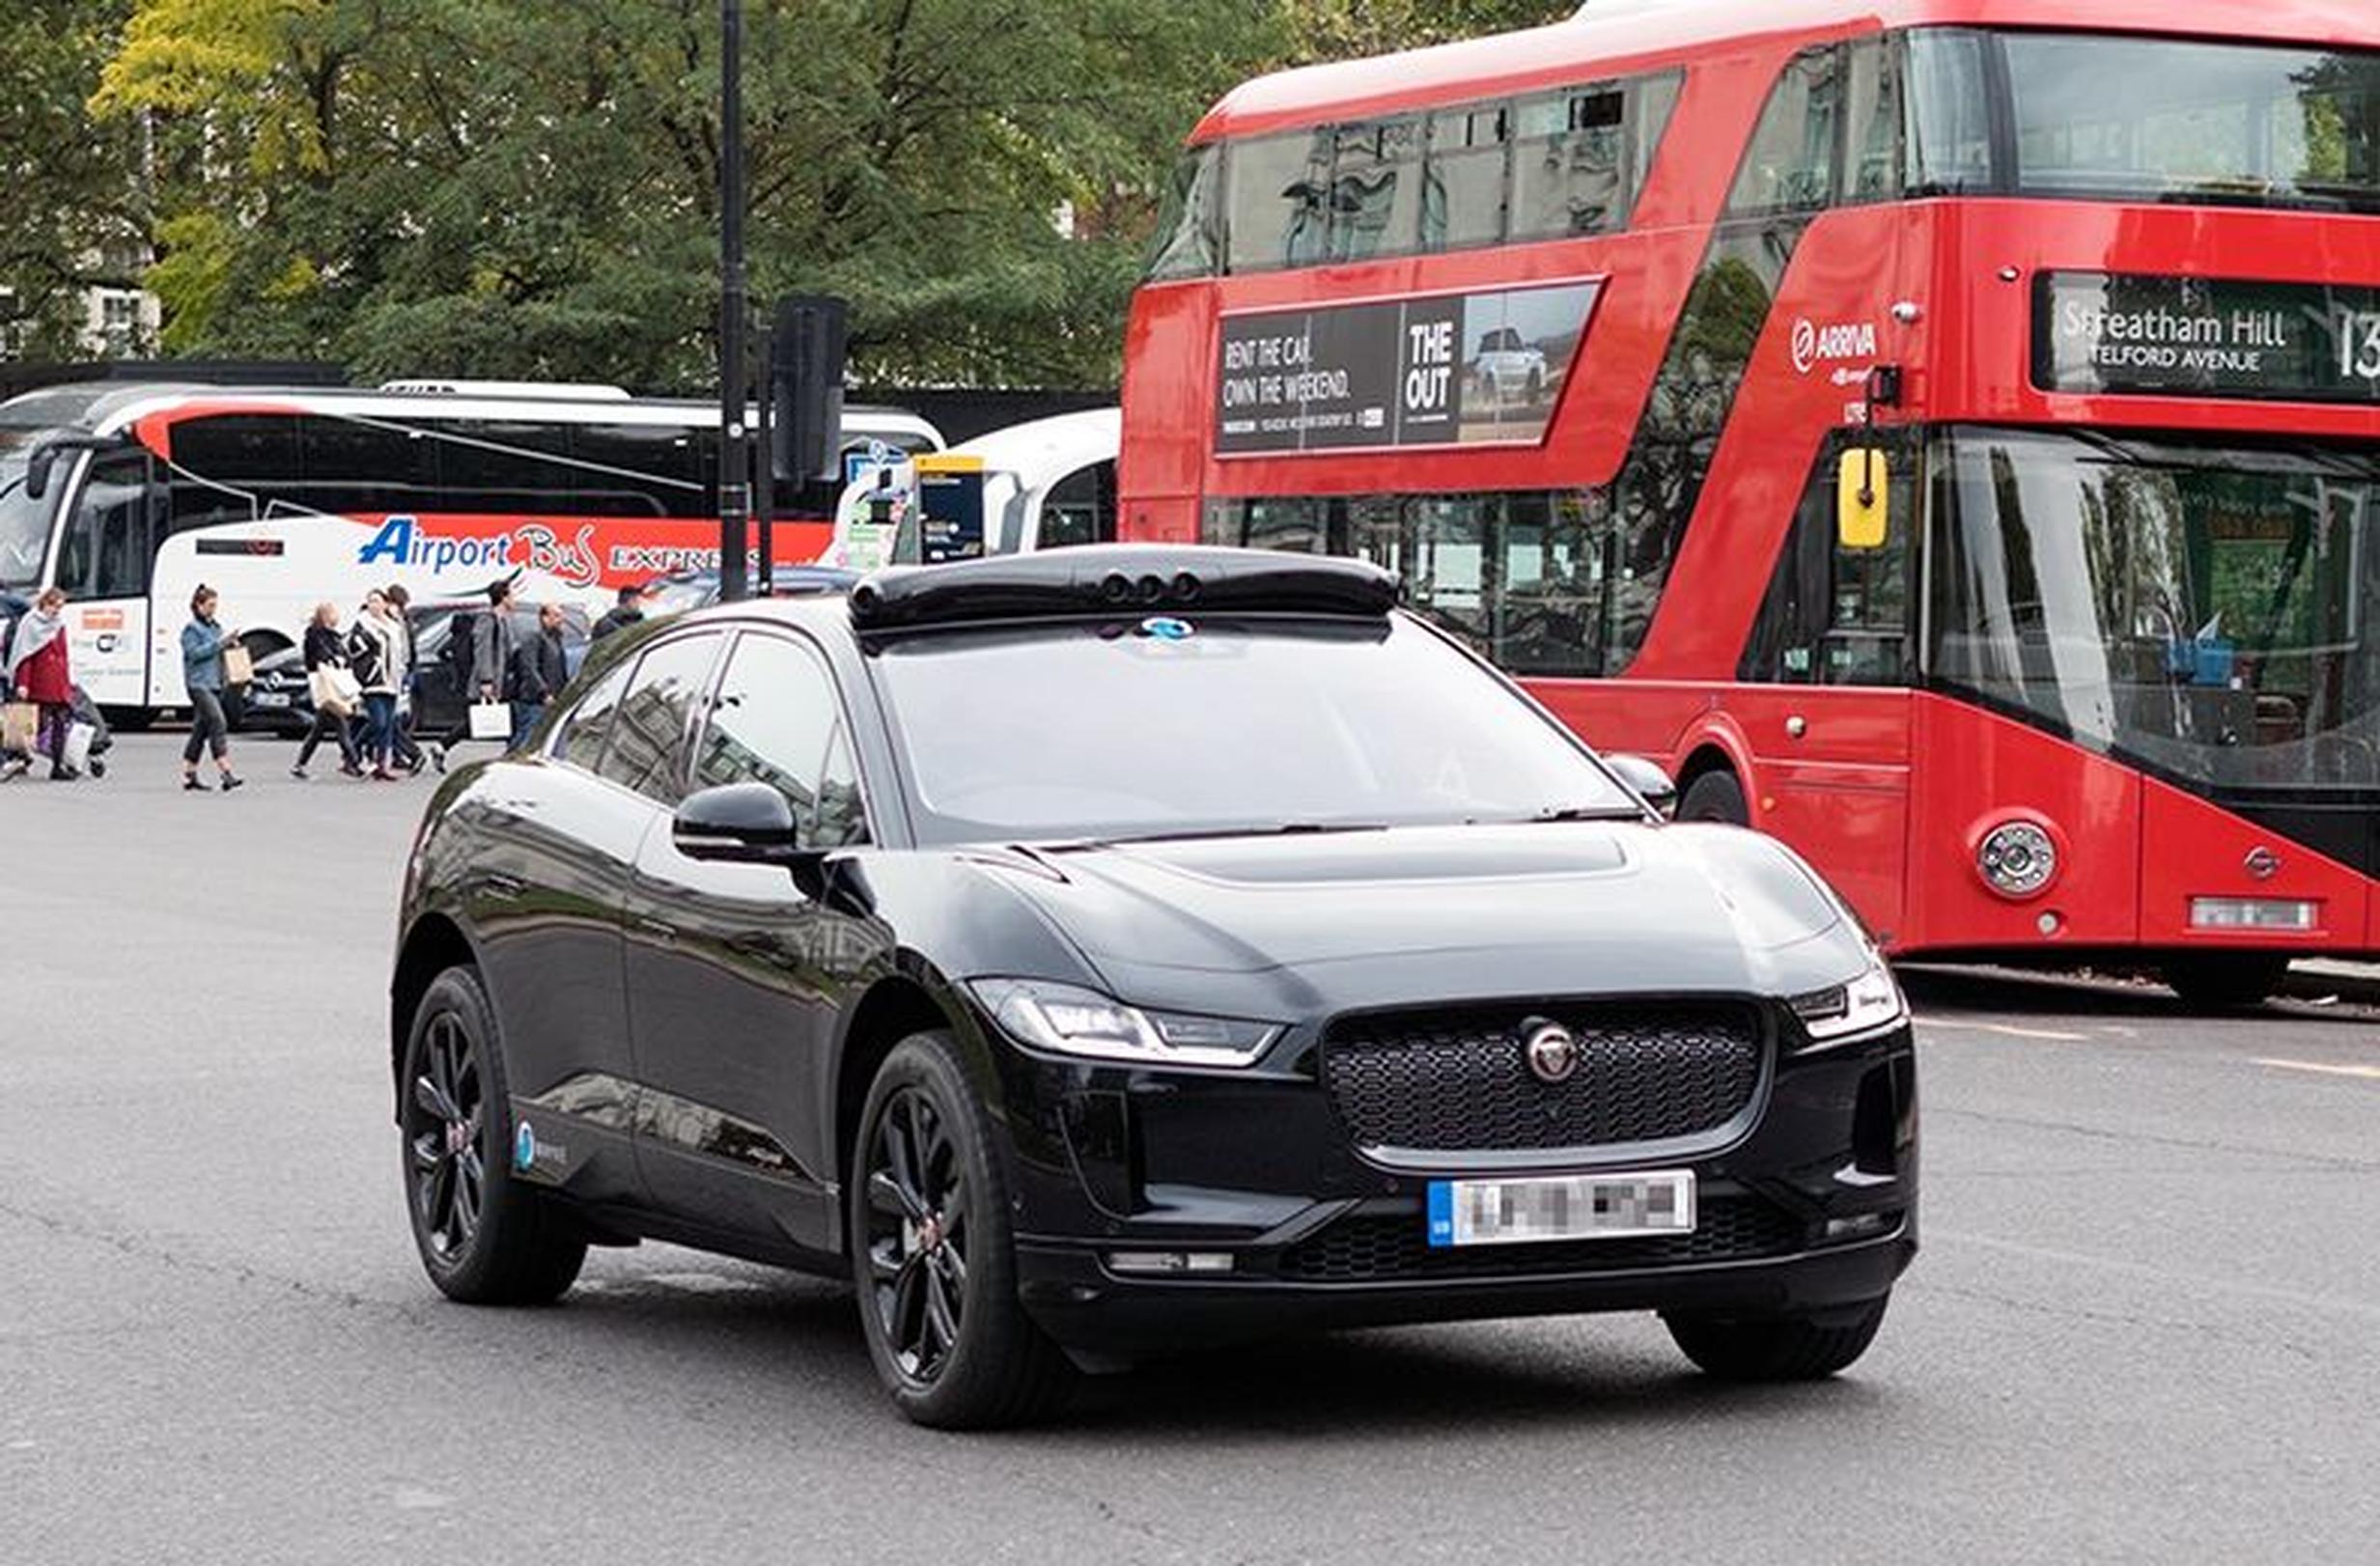 A Waybe pilot vehicle in London